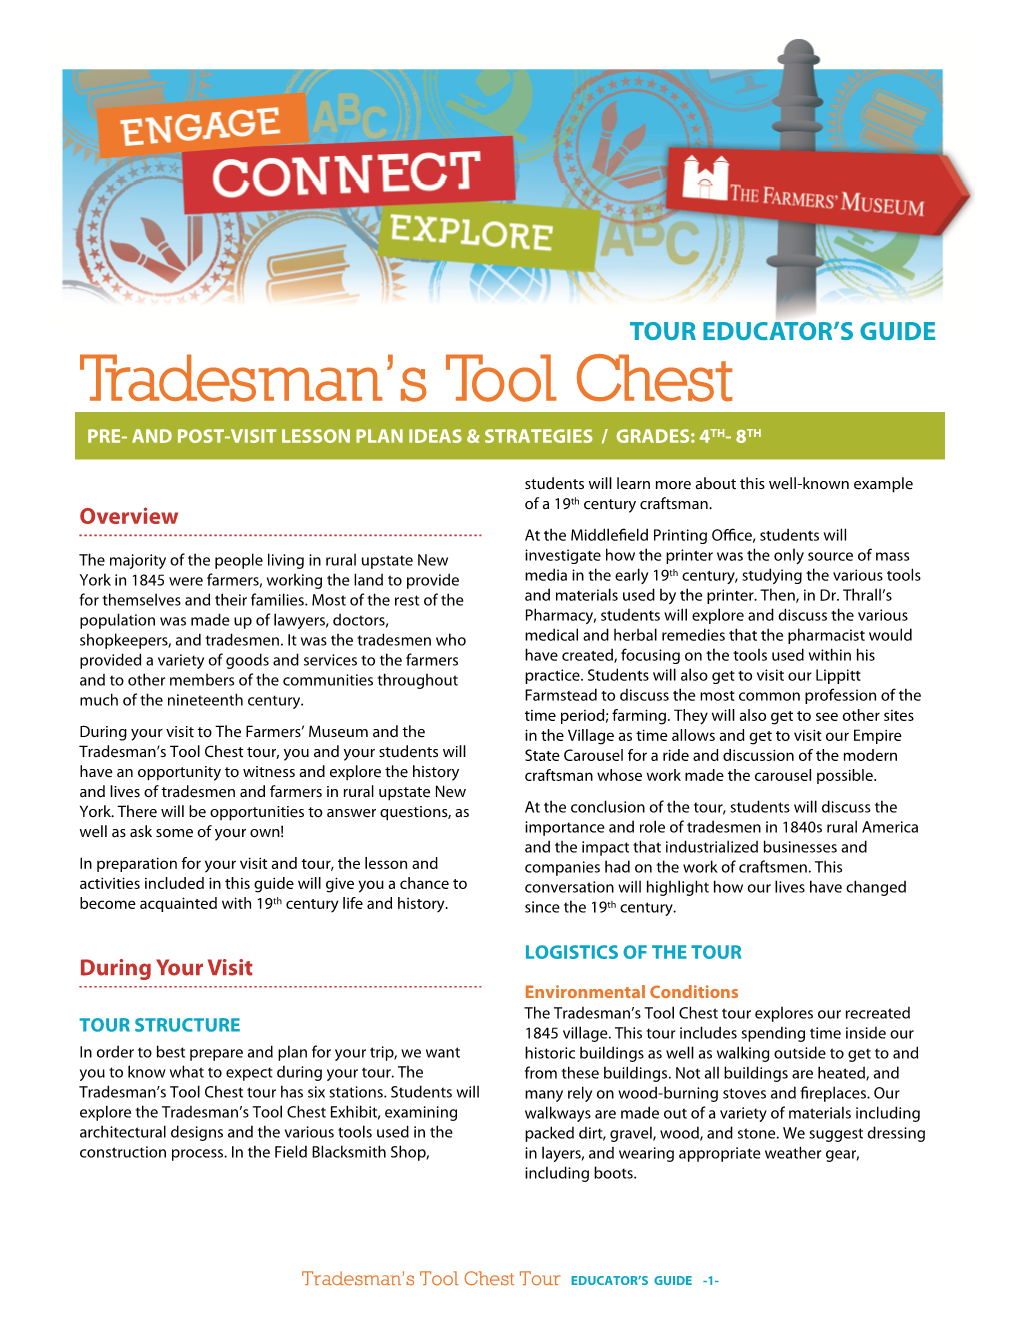 Tradesman's Tool Chest Educator's Guide